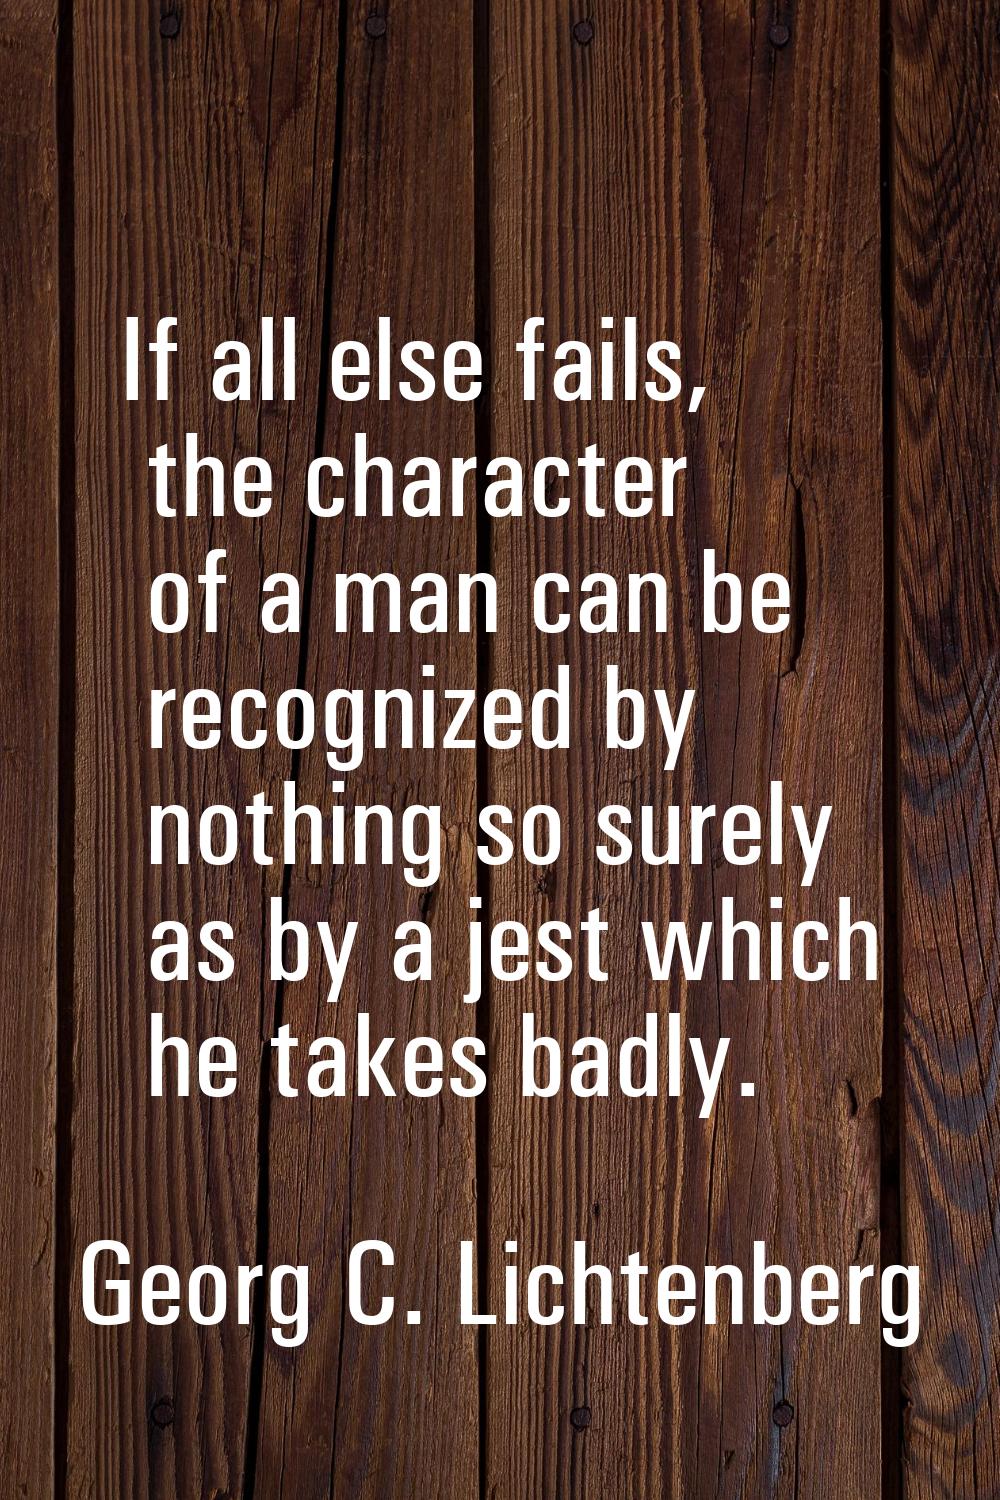 If all else fails, the character of a man can be recognized by nothing so surely as by a jest which